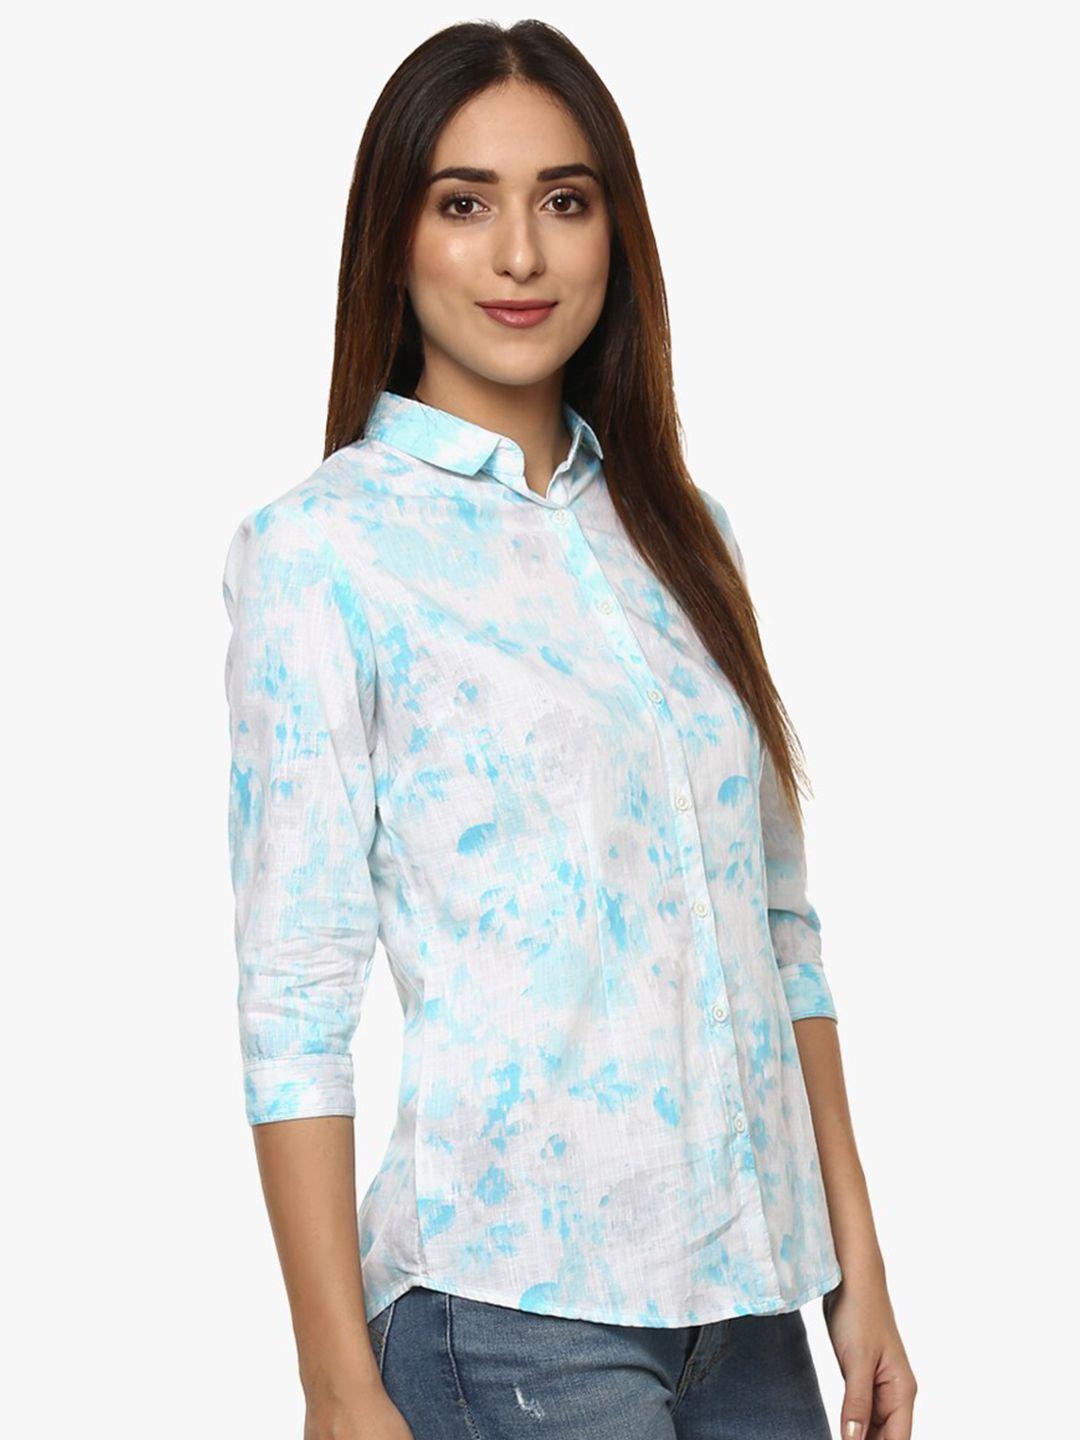 crimsoune-club-slim-fit-abstract-printed-pure-cotton-casual-shirt